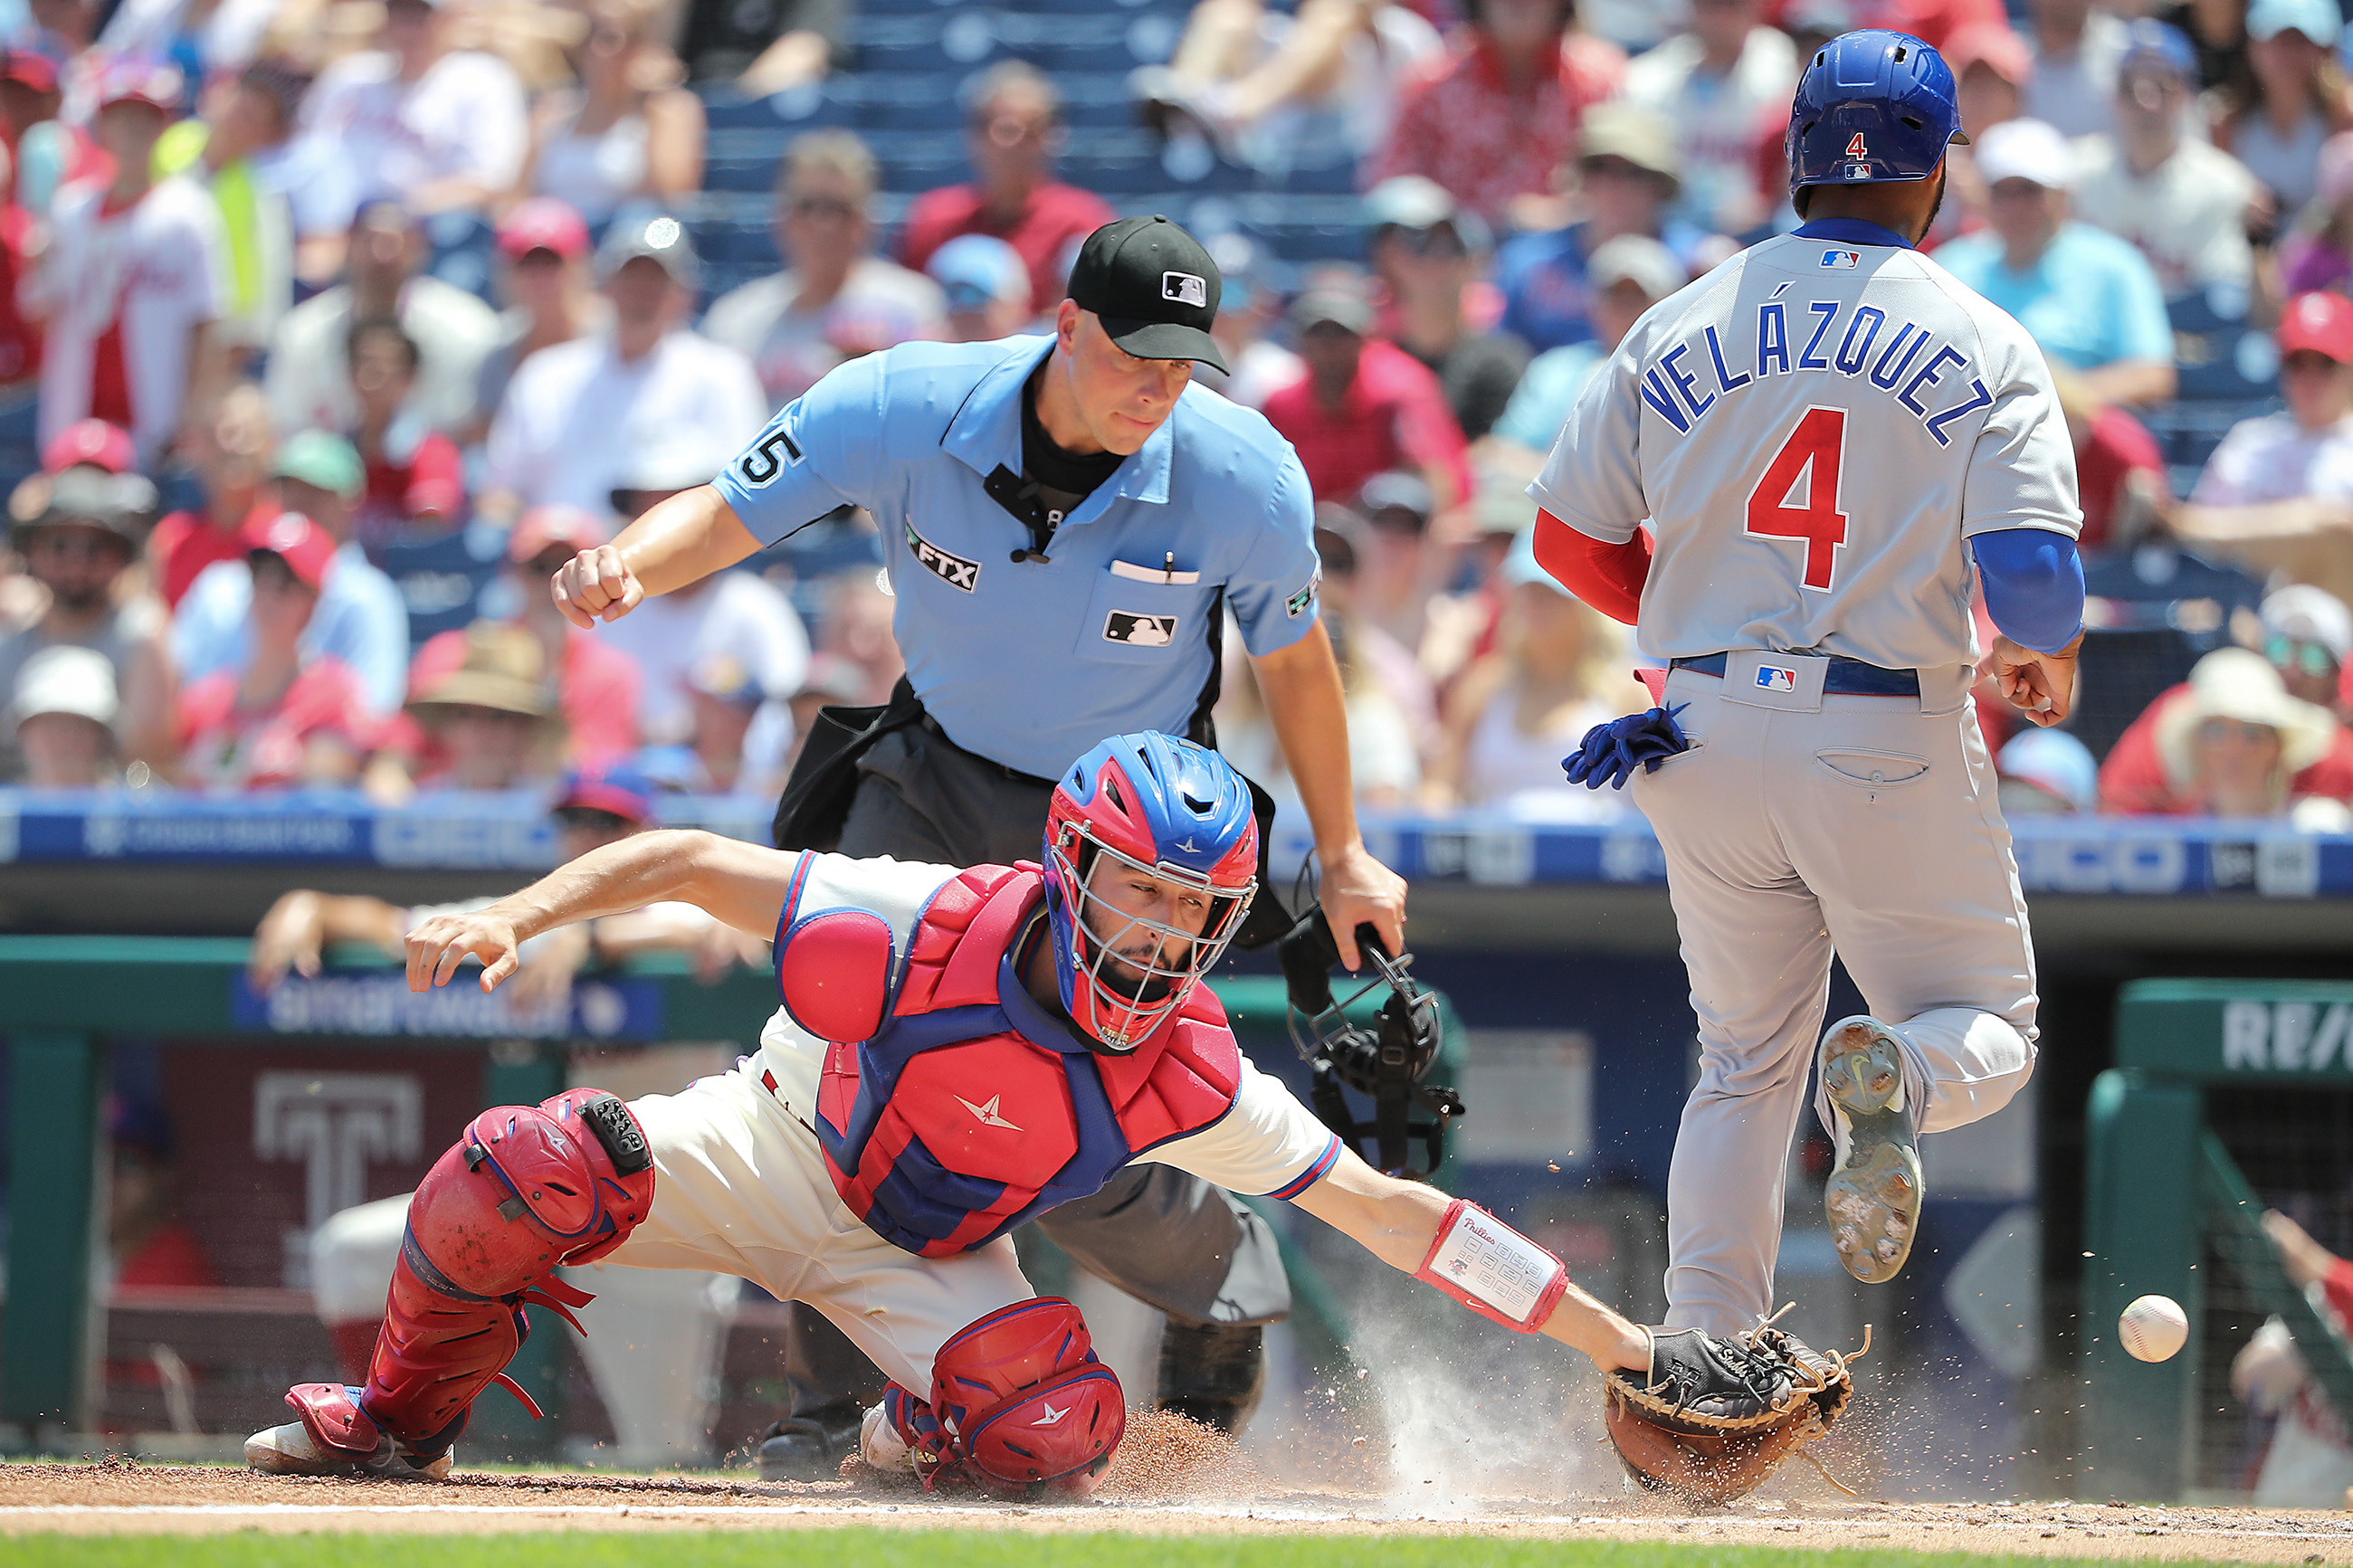 Cubs jump on Ranger Suárez early to send Phillies to fifth